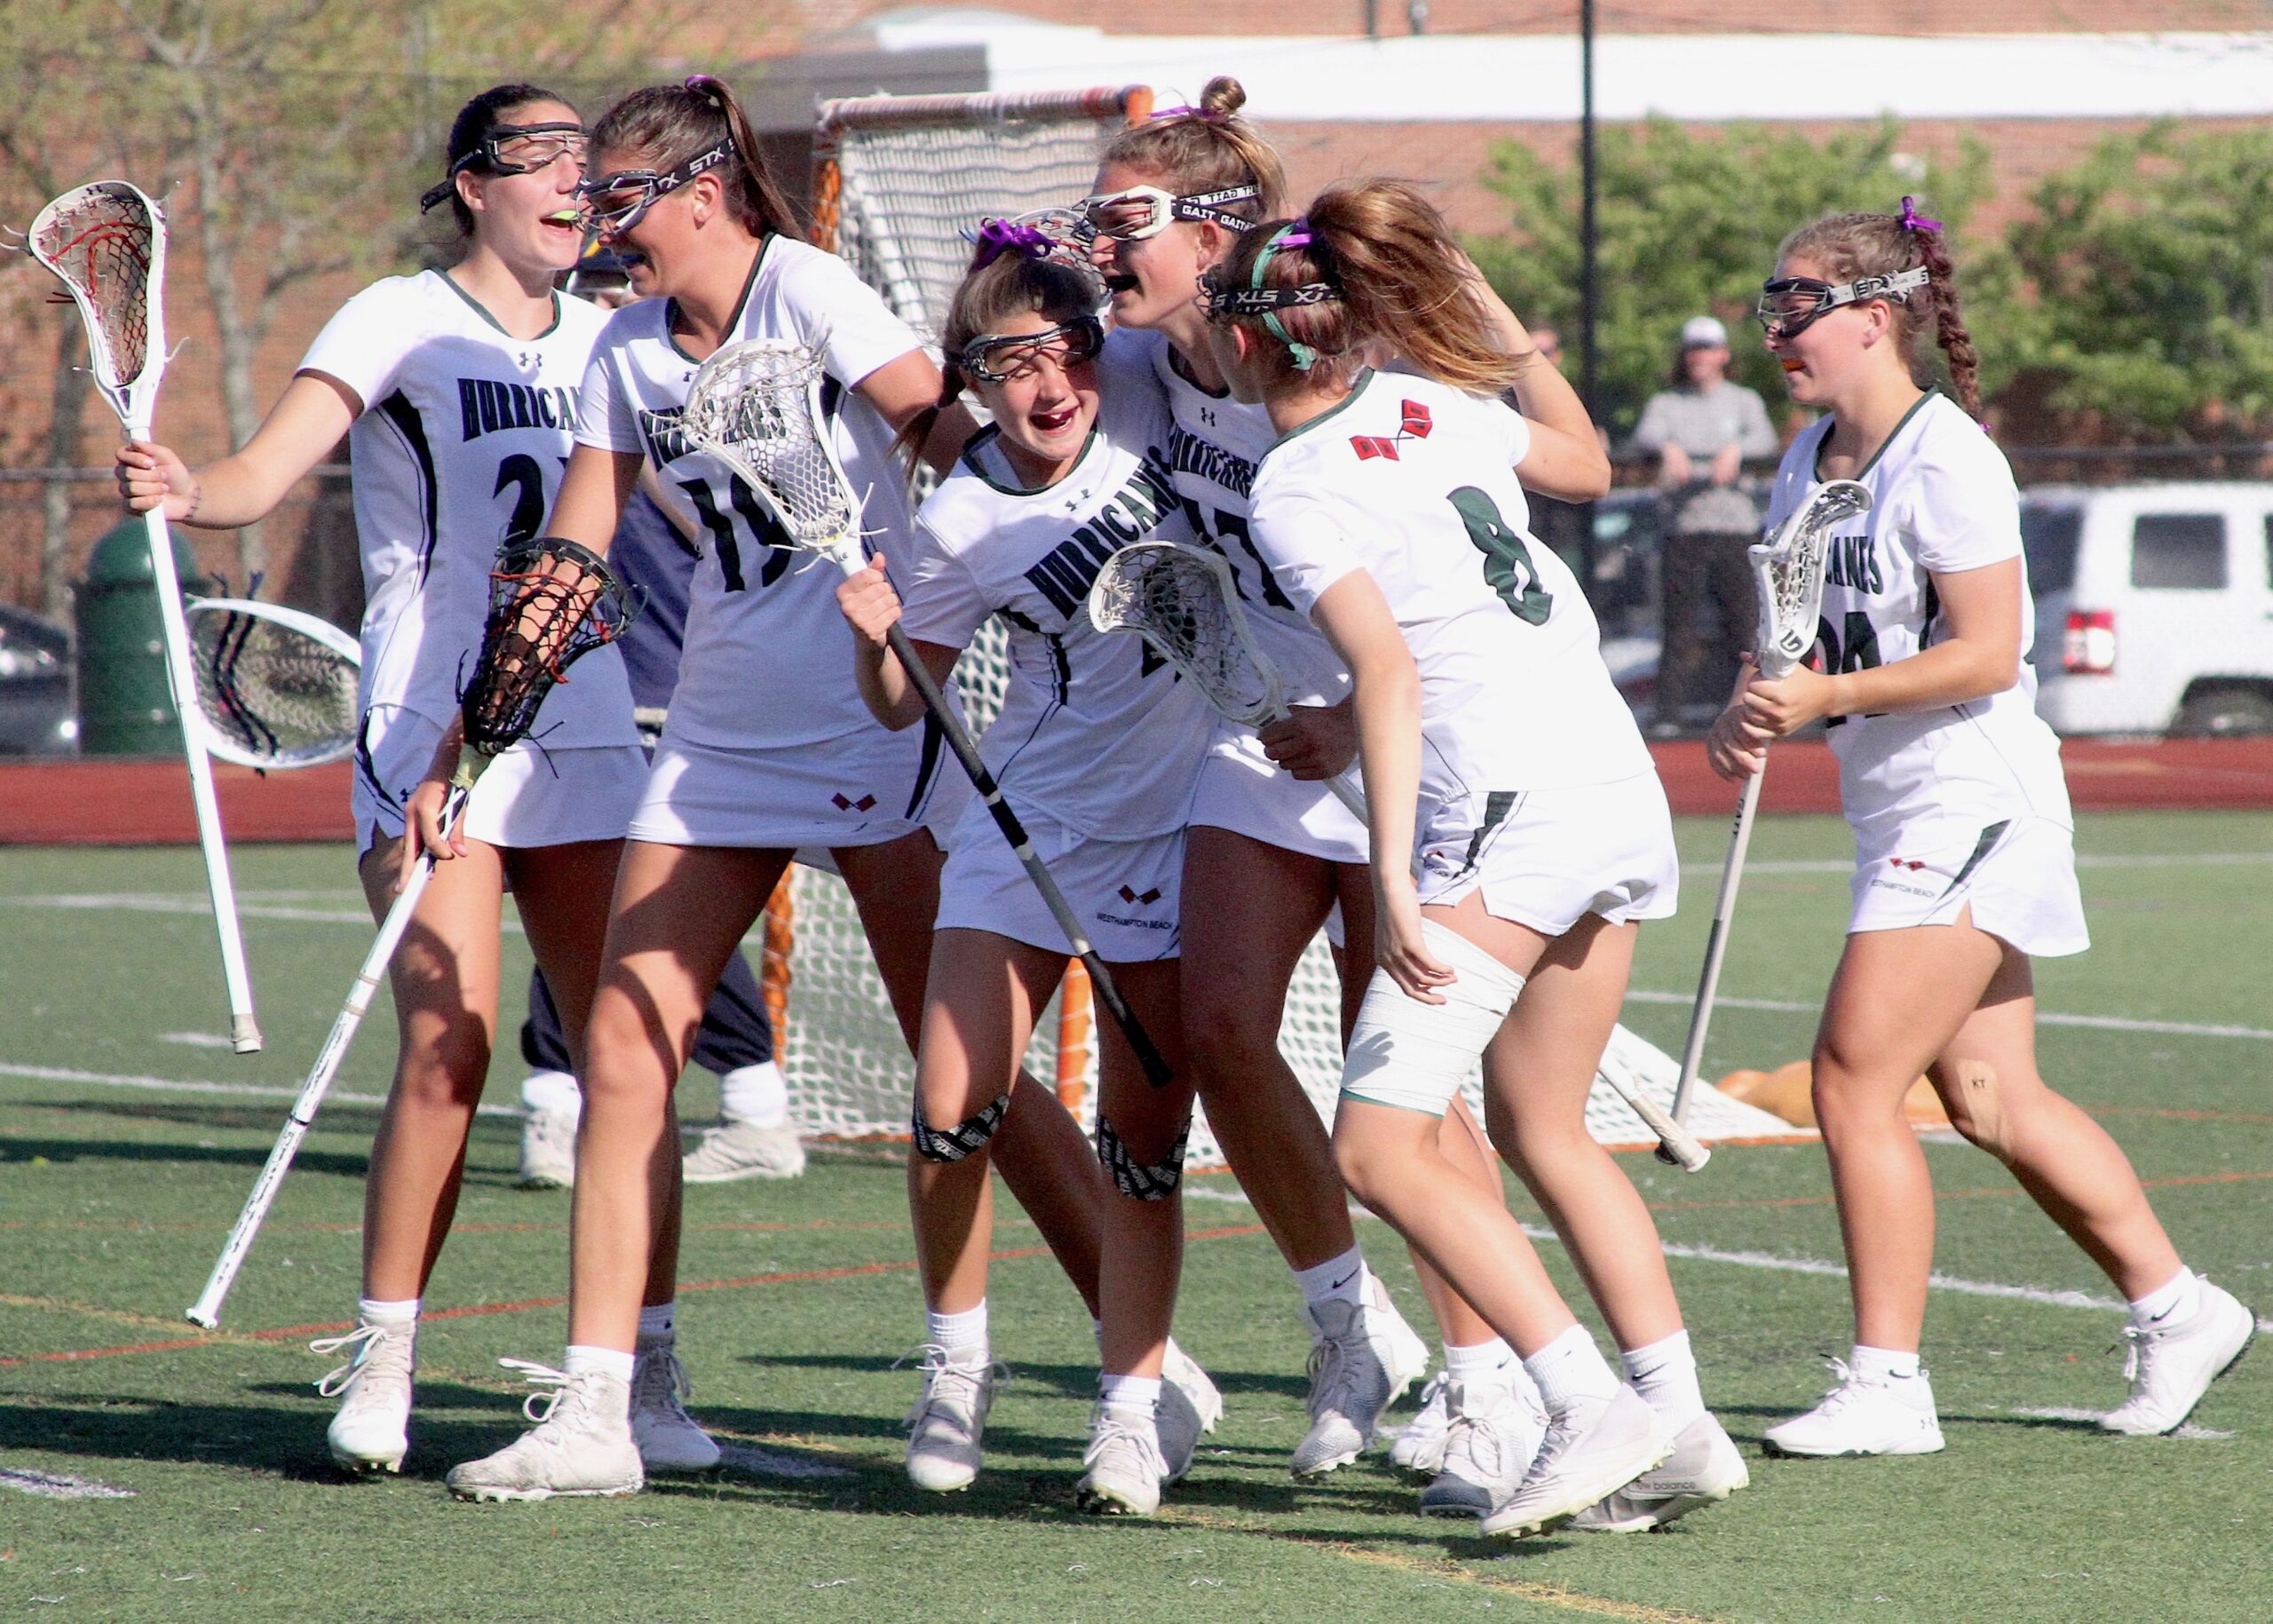 Westhampton Beach's offense surrounds Olivia Rongo and Reese King following their game-winning goal. DESIRÉE KEEGAN